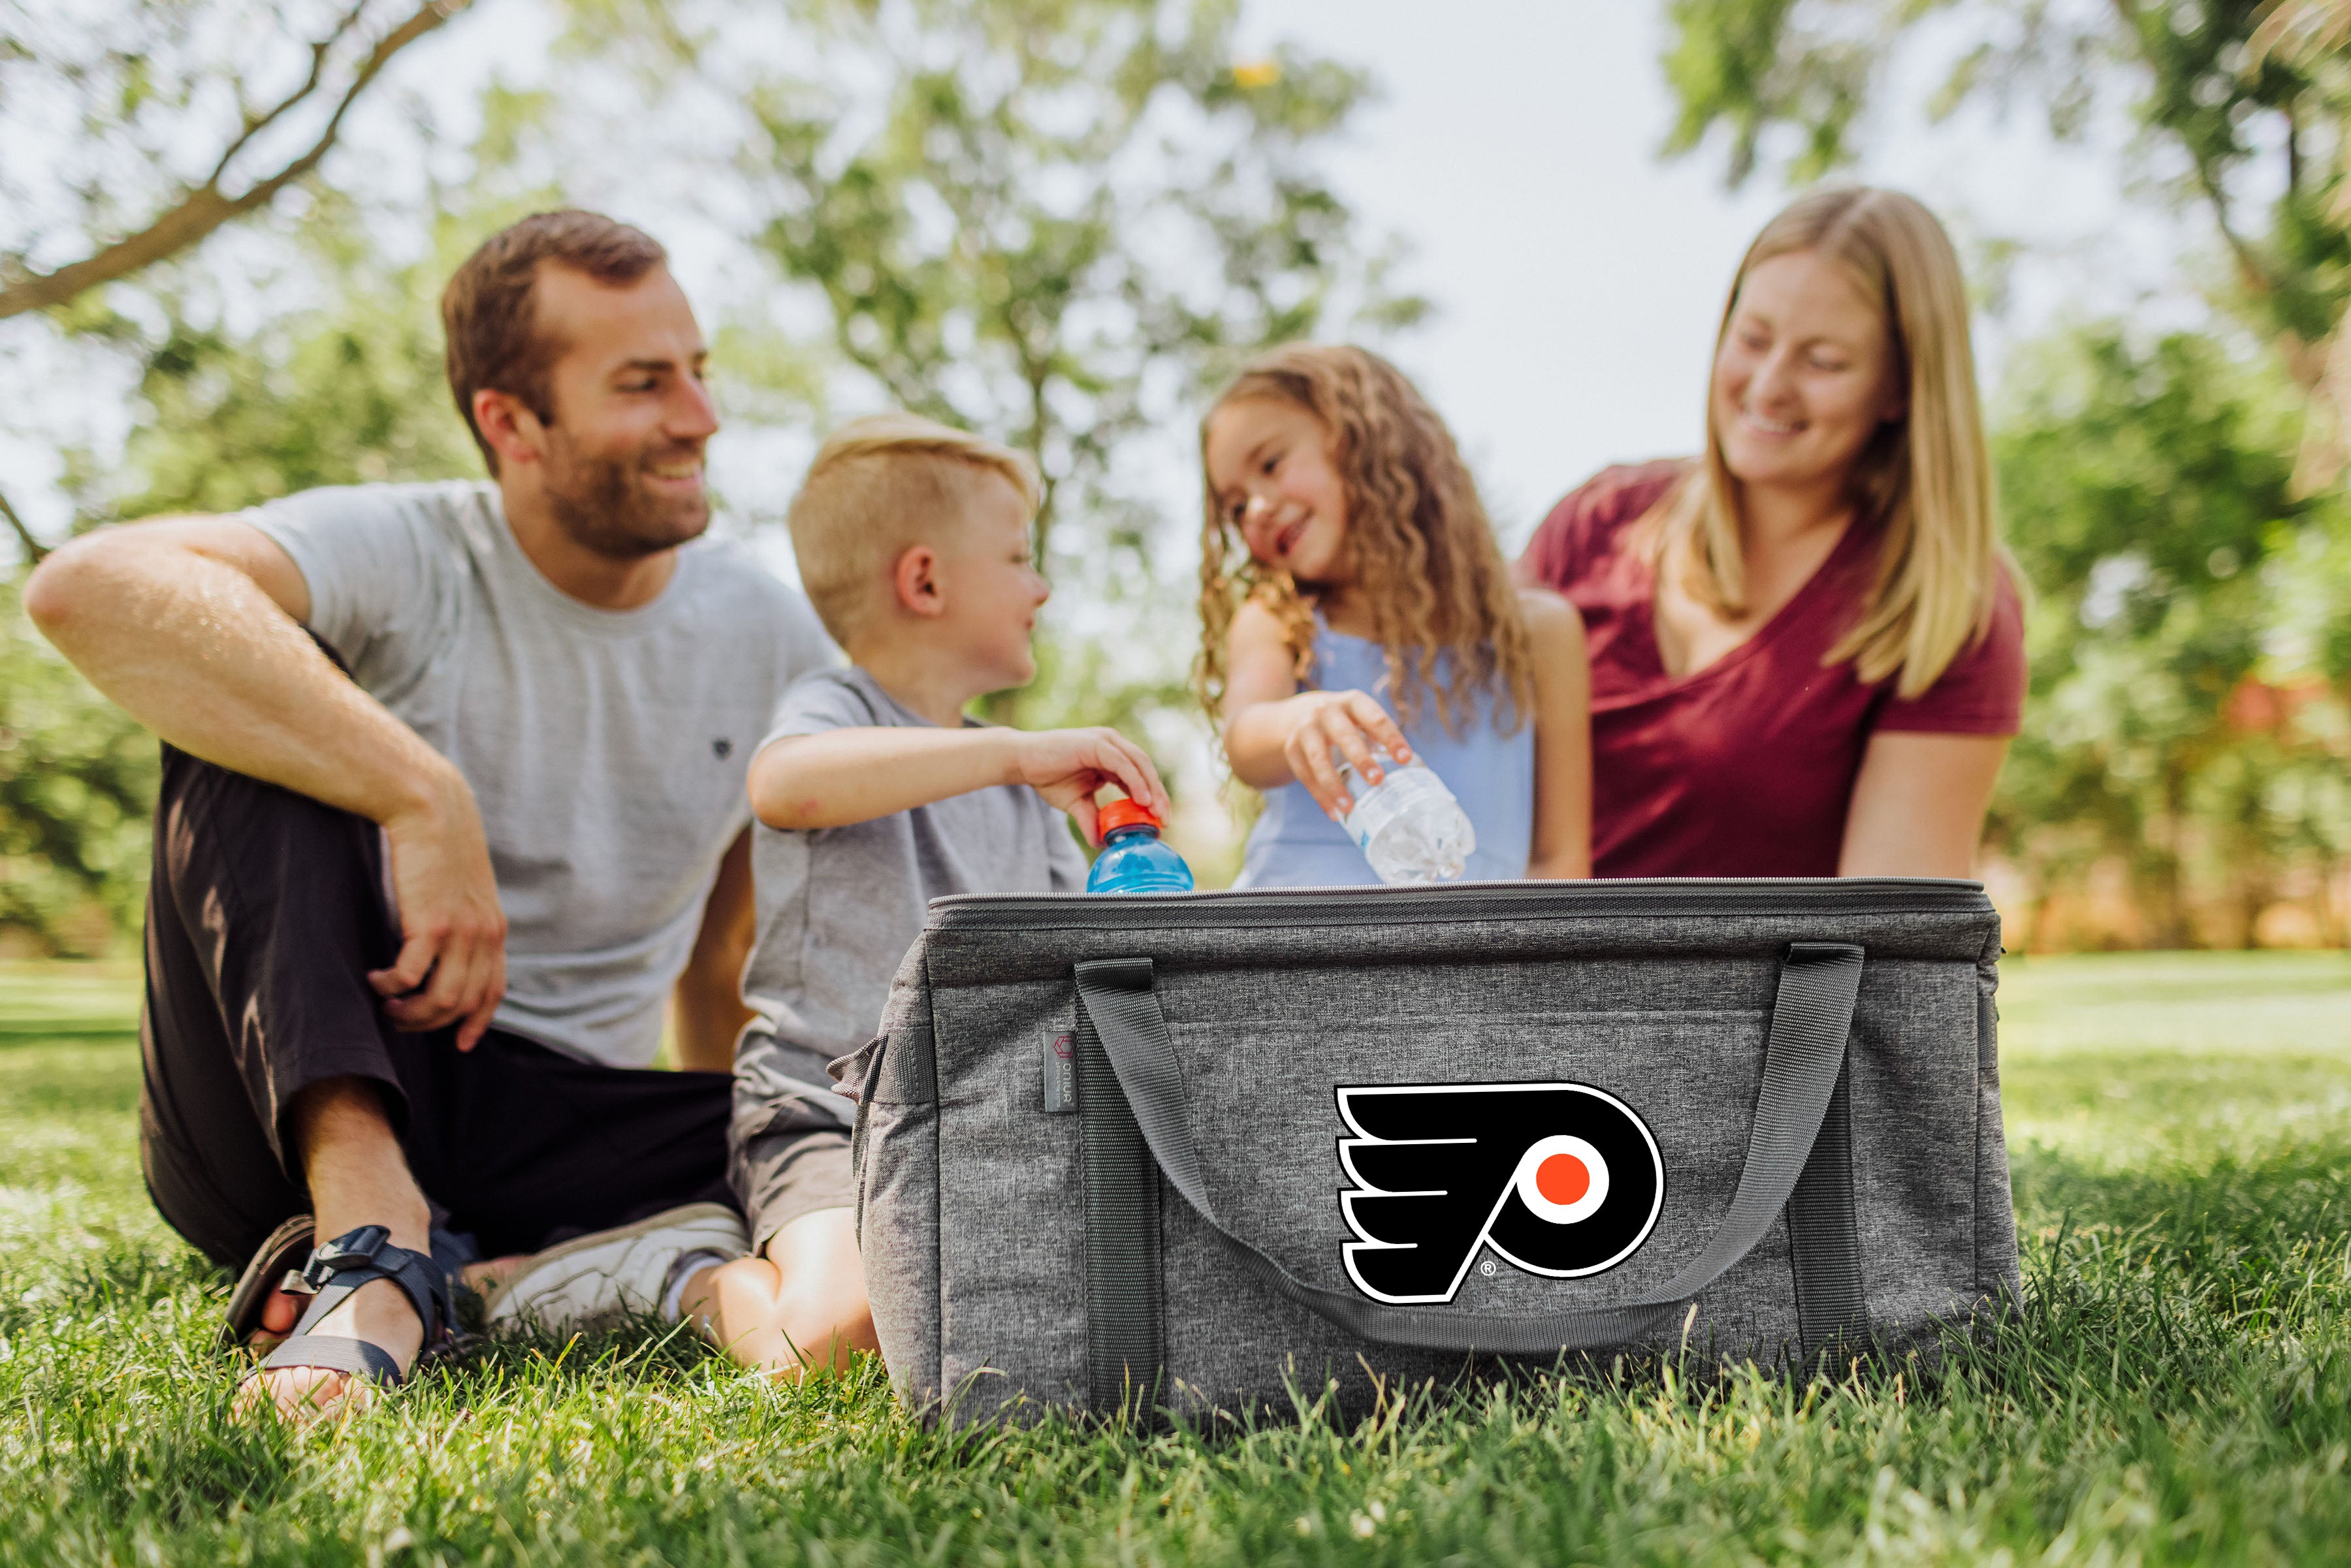 Philadelphia Flyers - 64 Can Collapsible Cooler